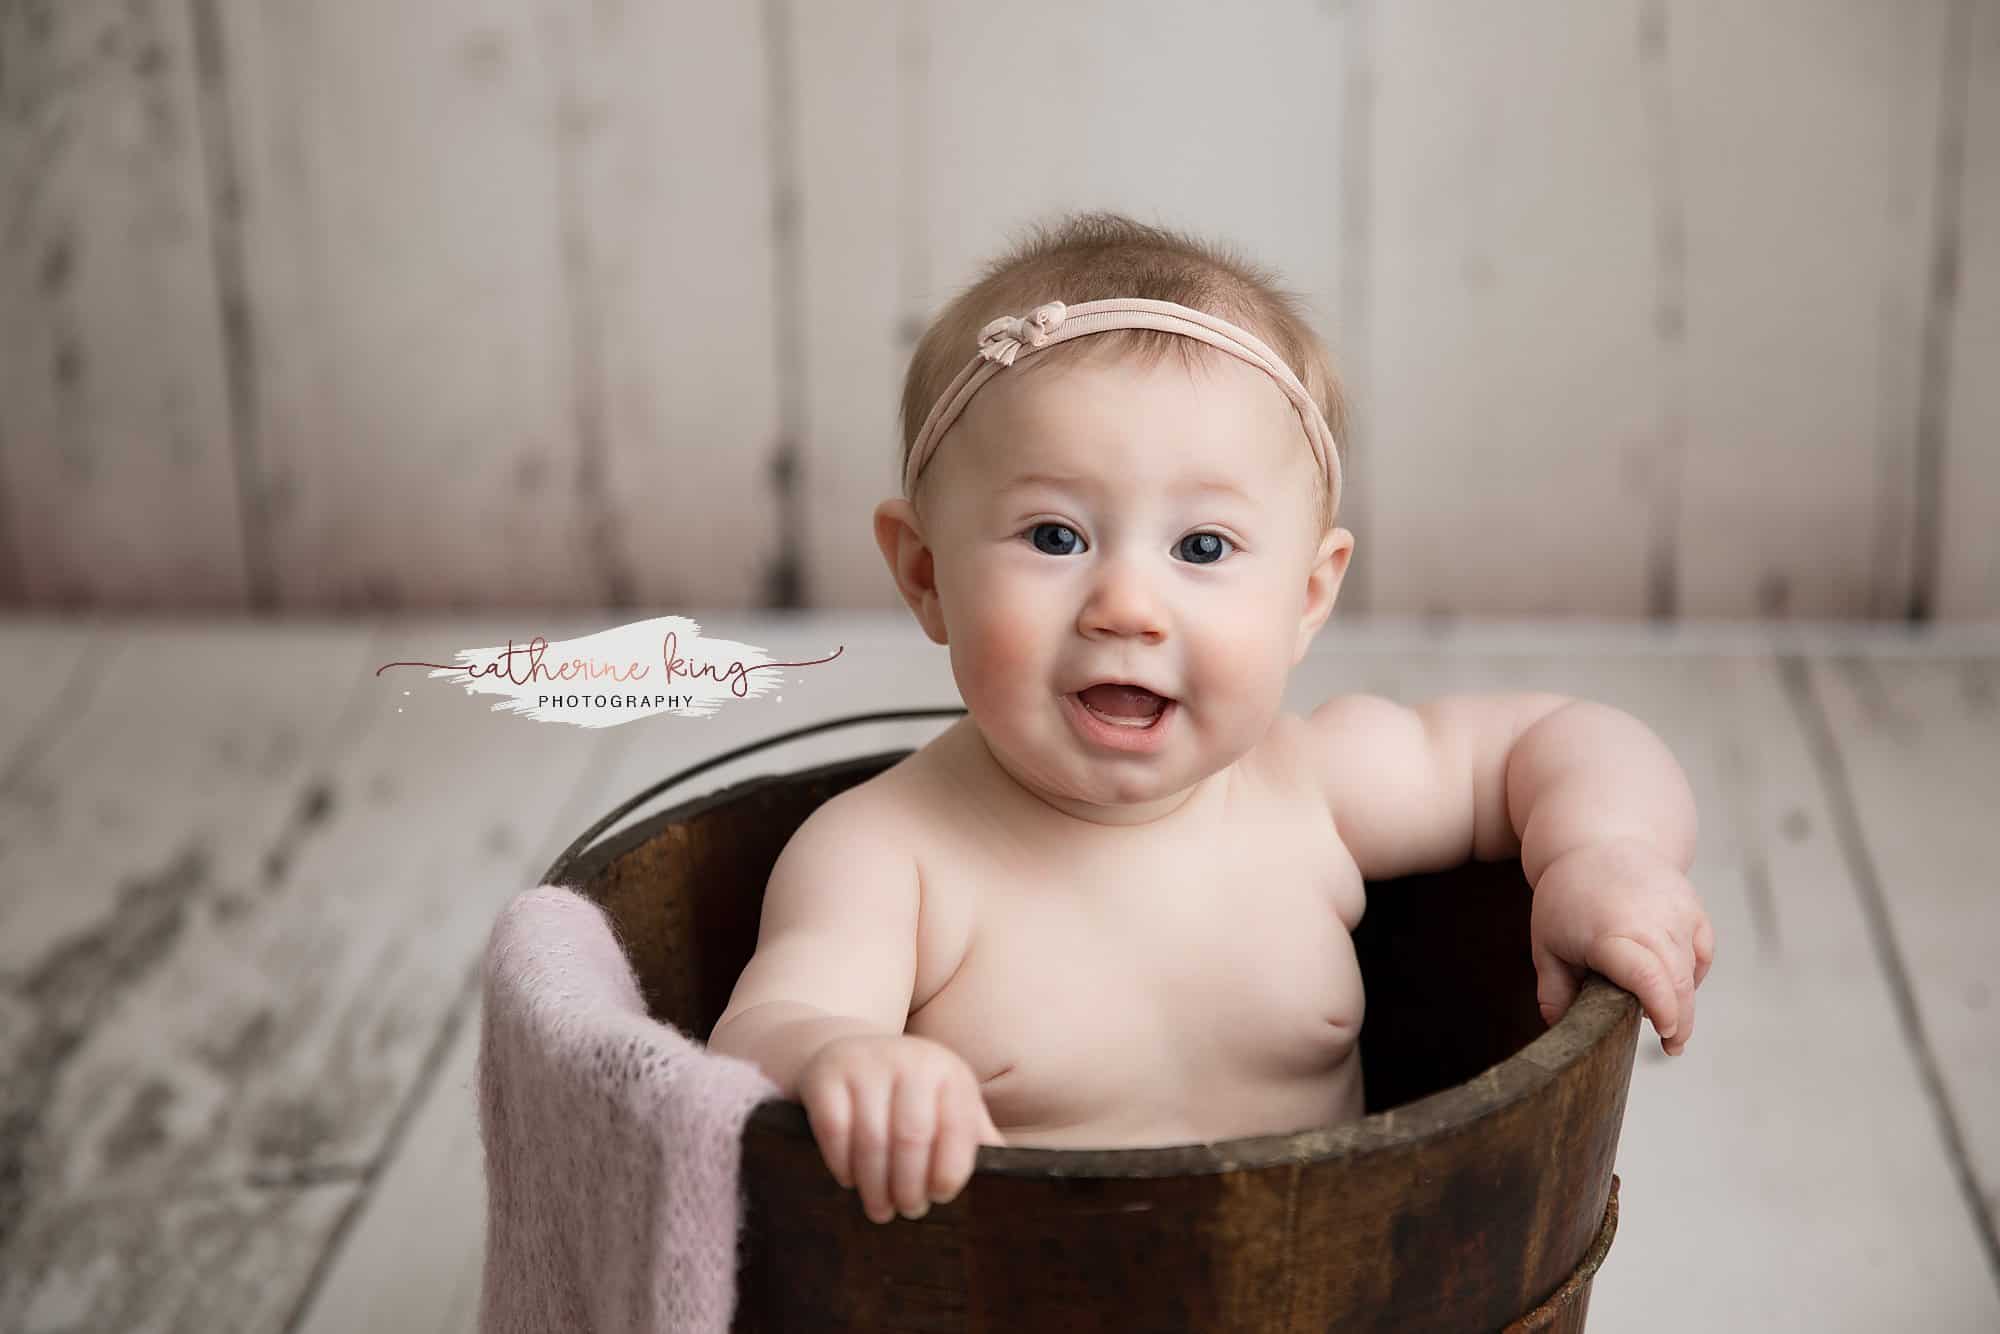 6 month old baby photography session by catherine king photography a new haven county newborn photographer in ct